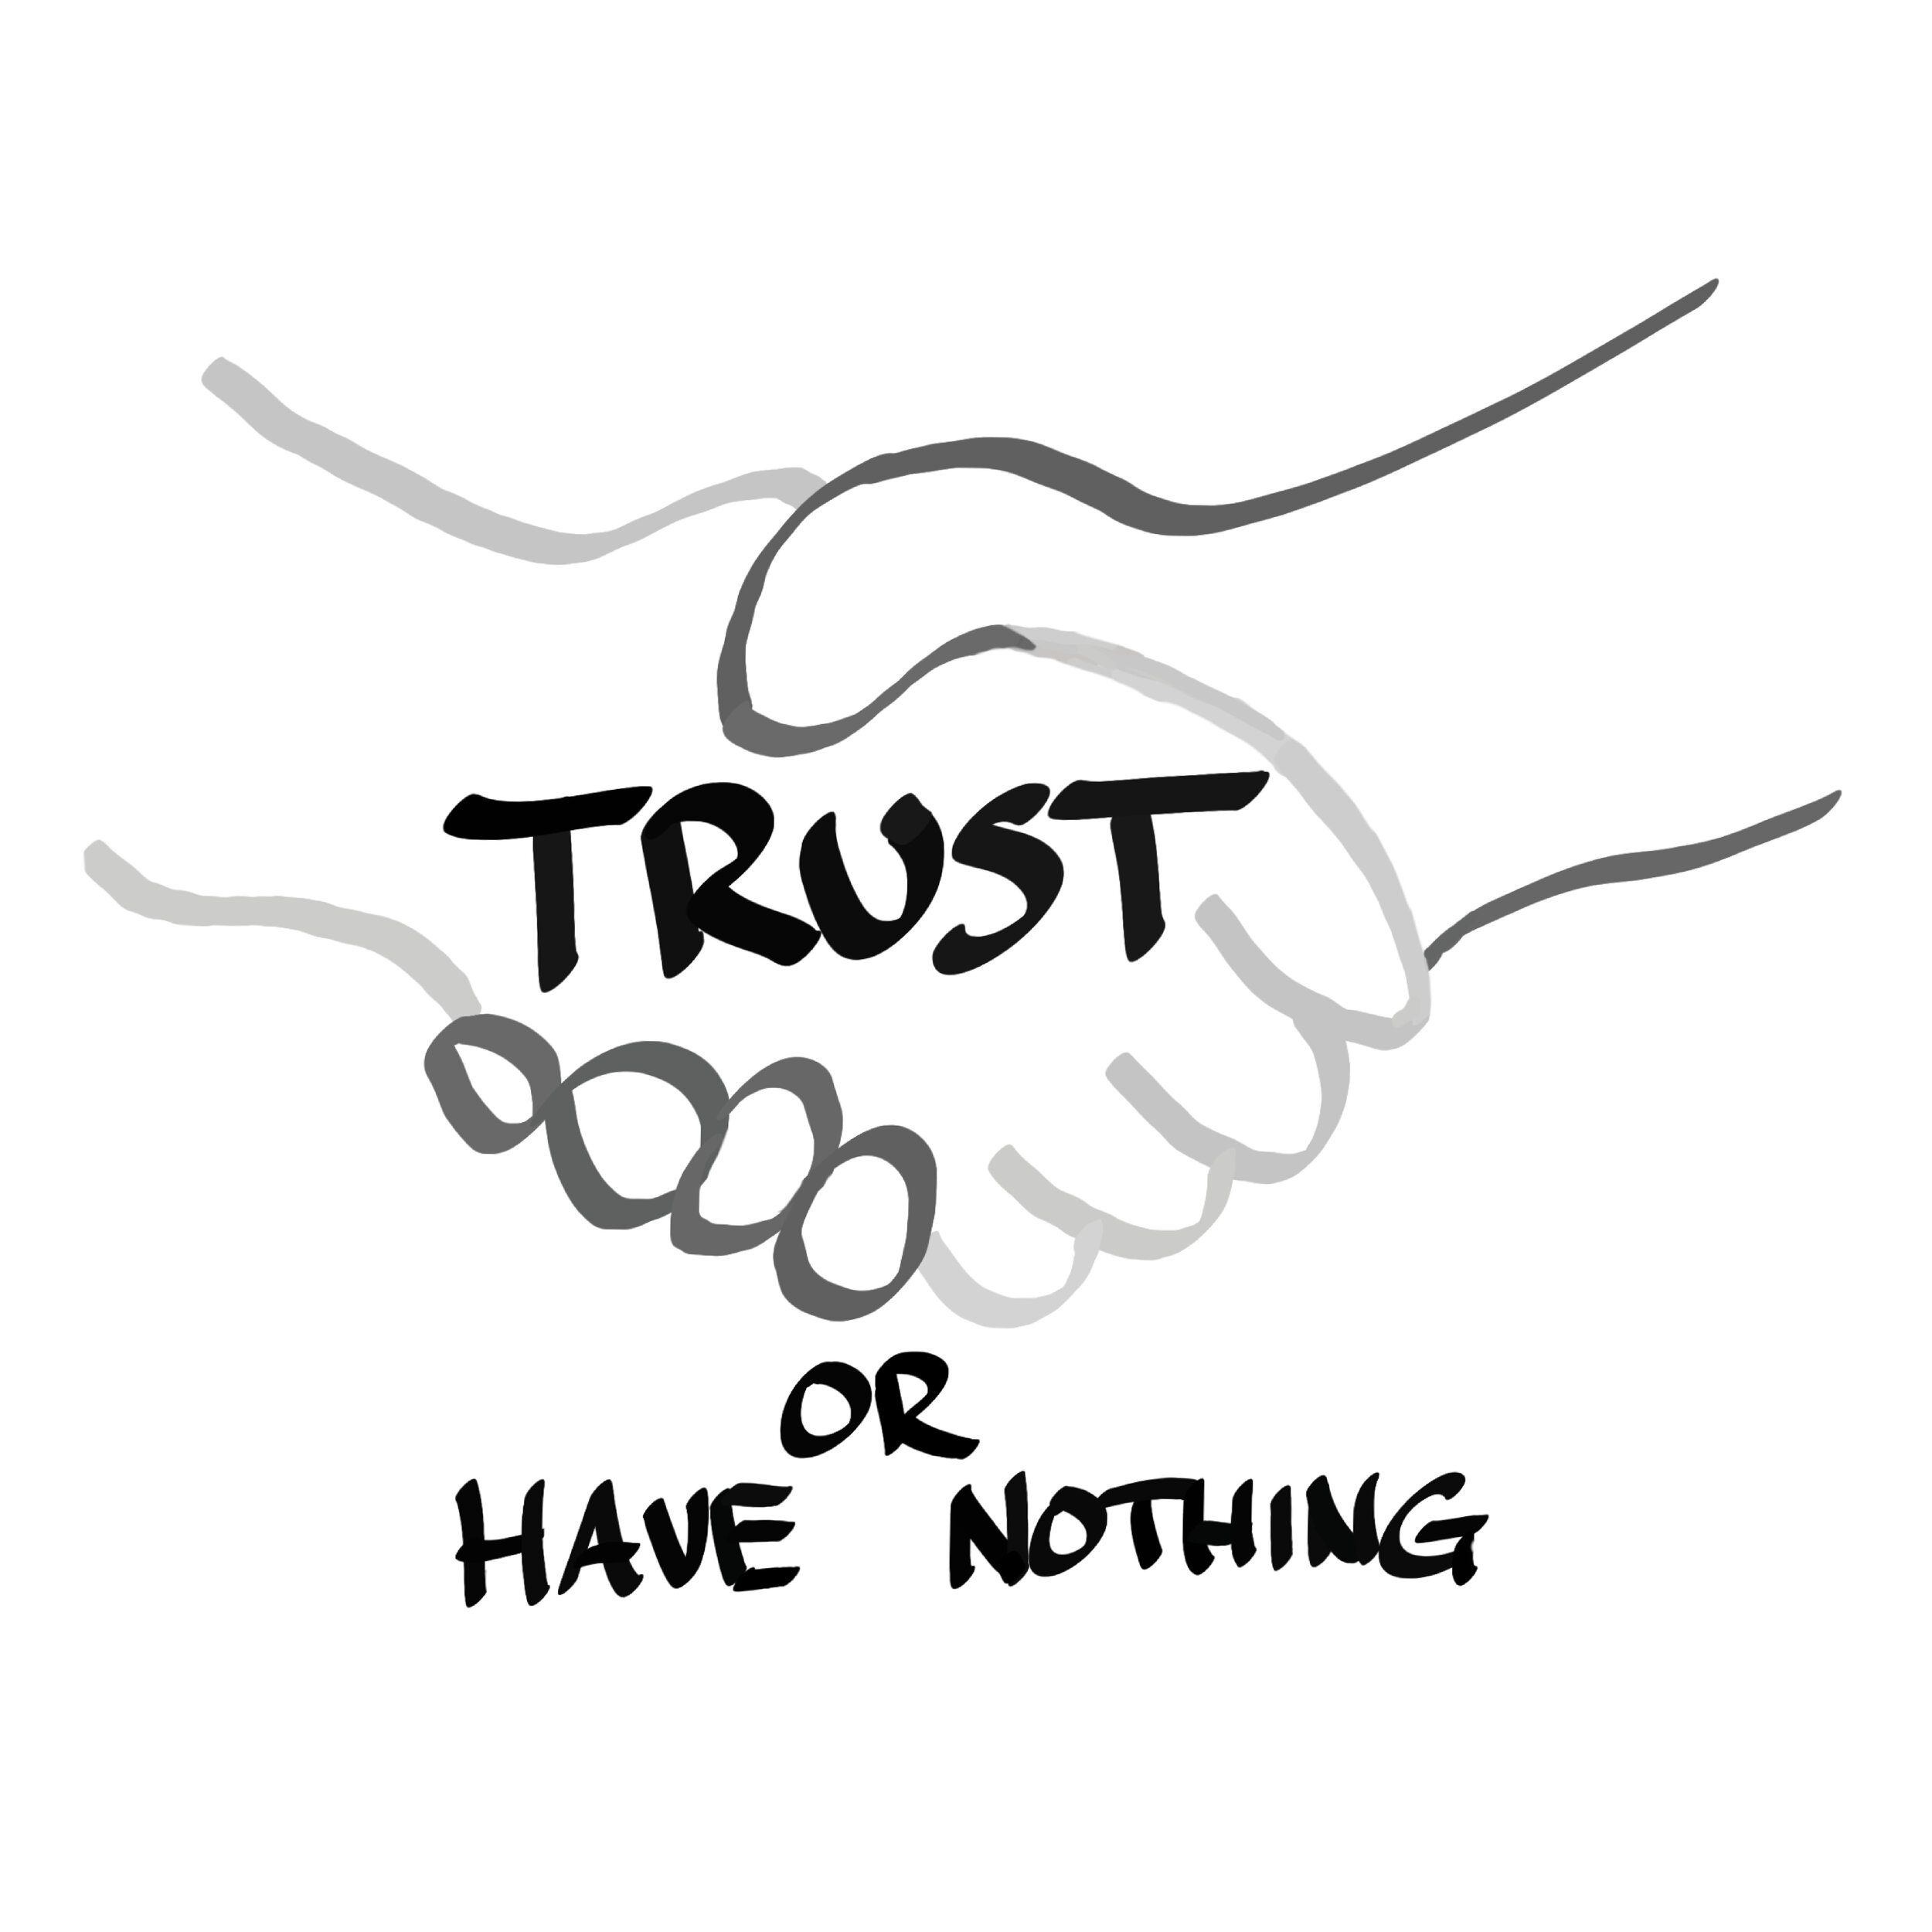 Trust or have nothing.jpg